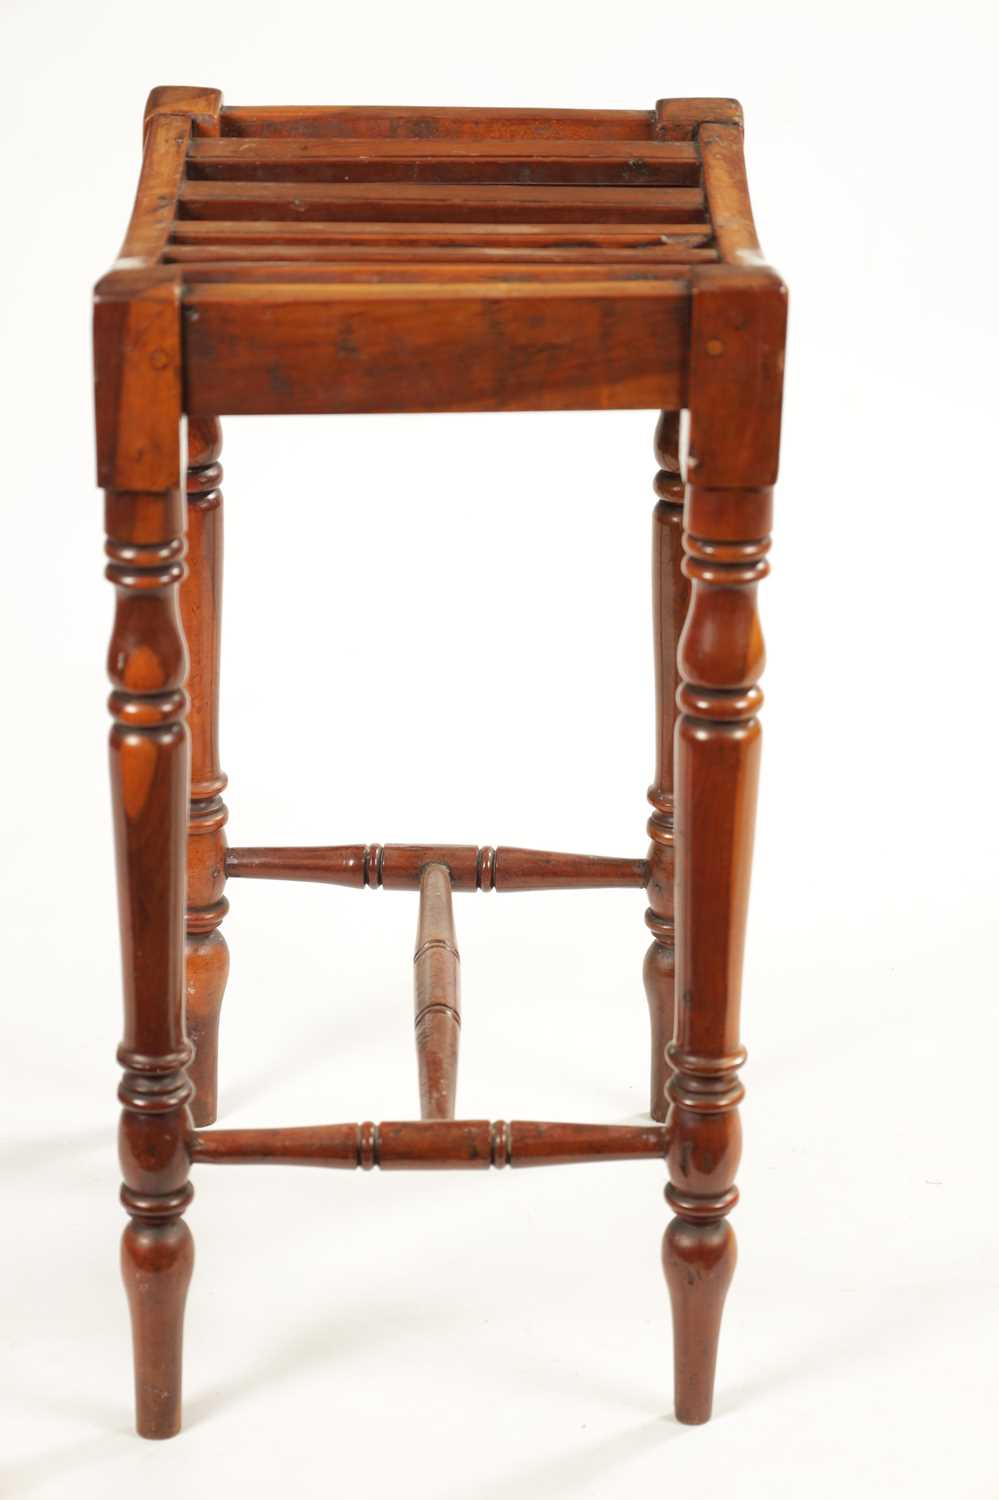 A RARE REGENCY YEW WOOD SLATTED TOP STOOL - Image 6 of 6